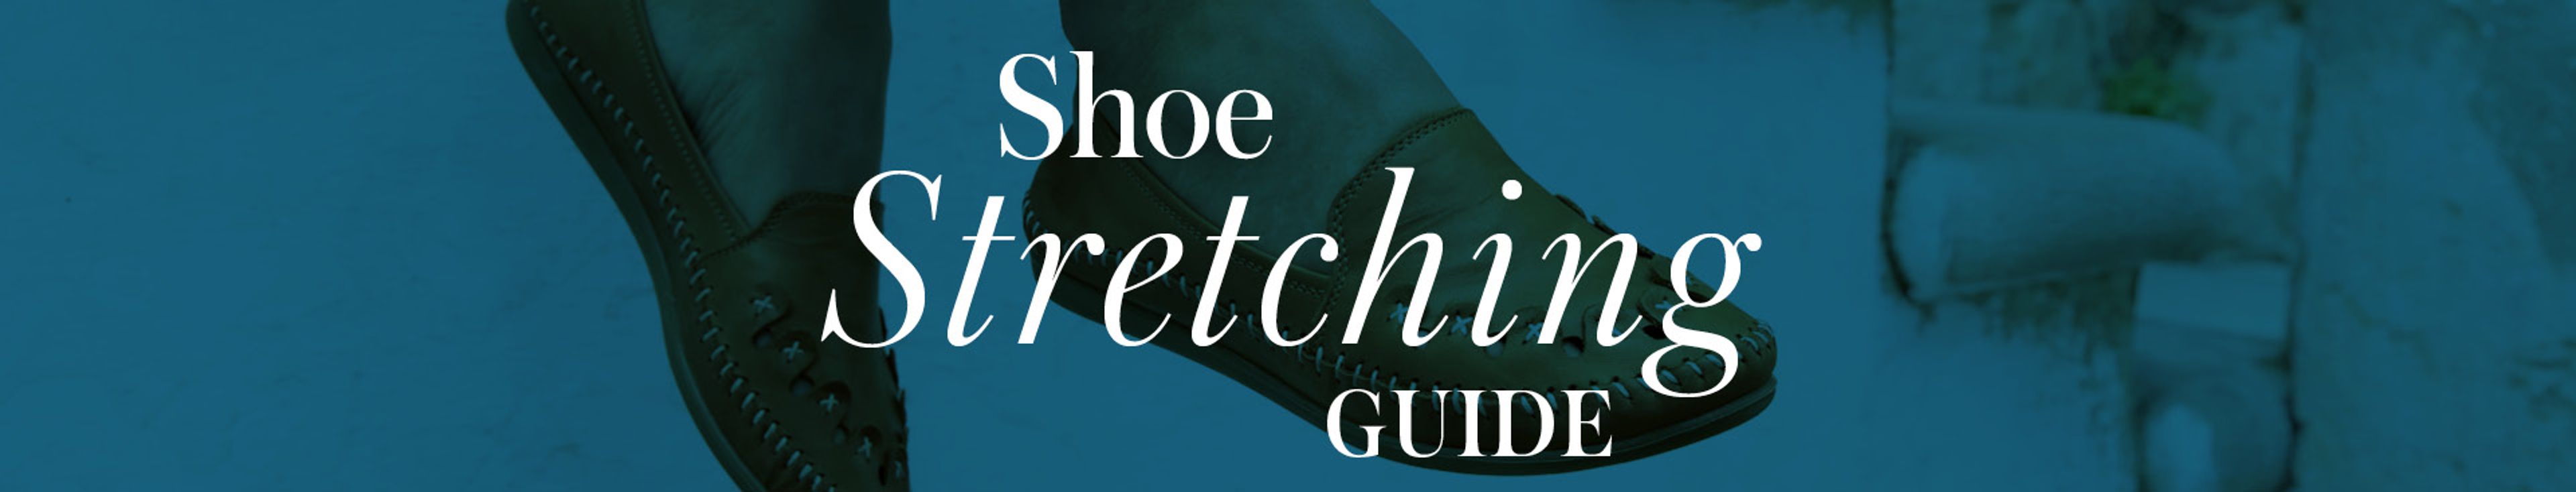 How to Stretch Shoes: Tight Shoes Guide